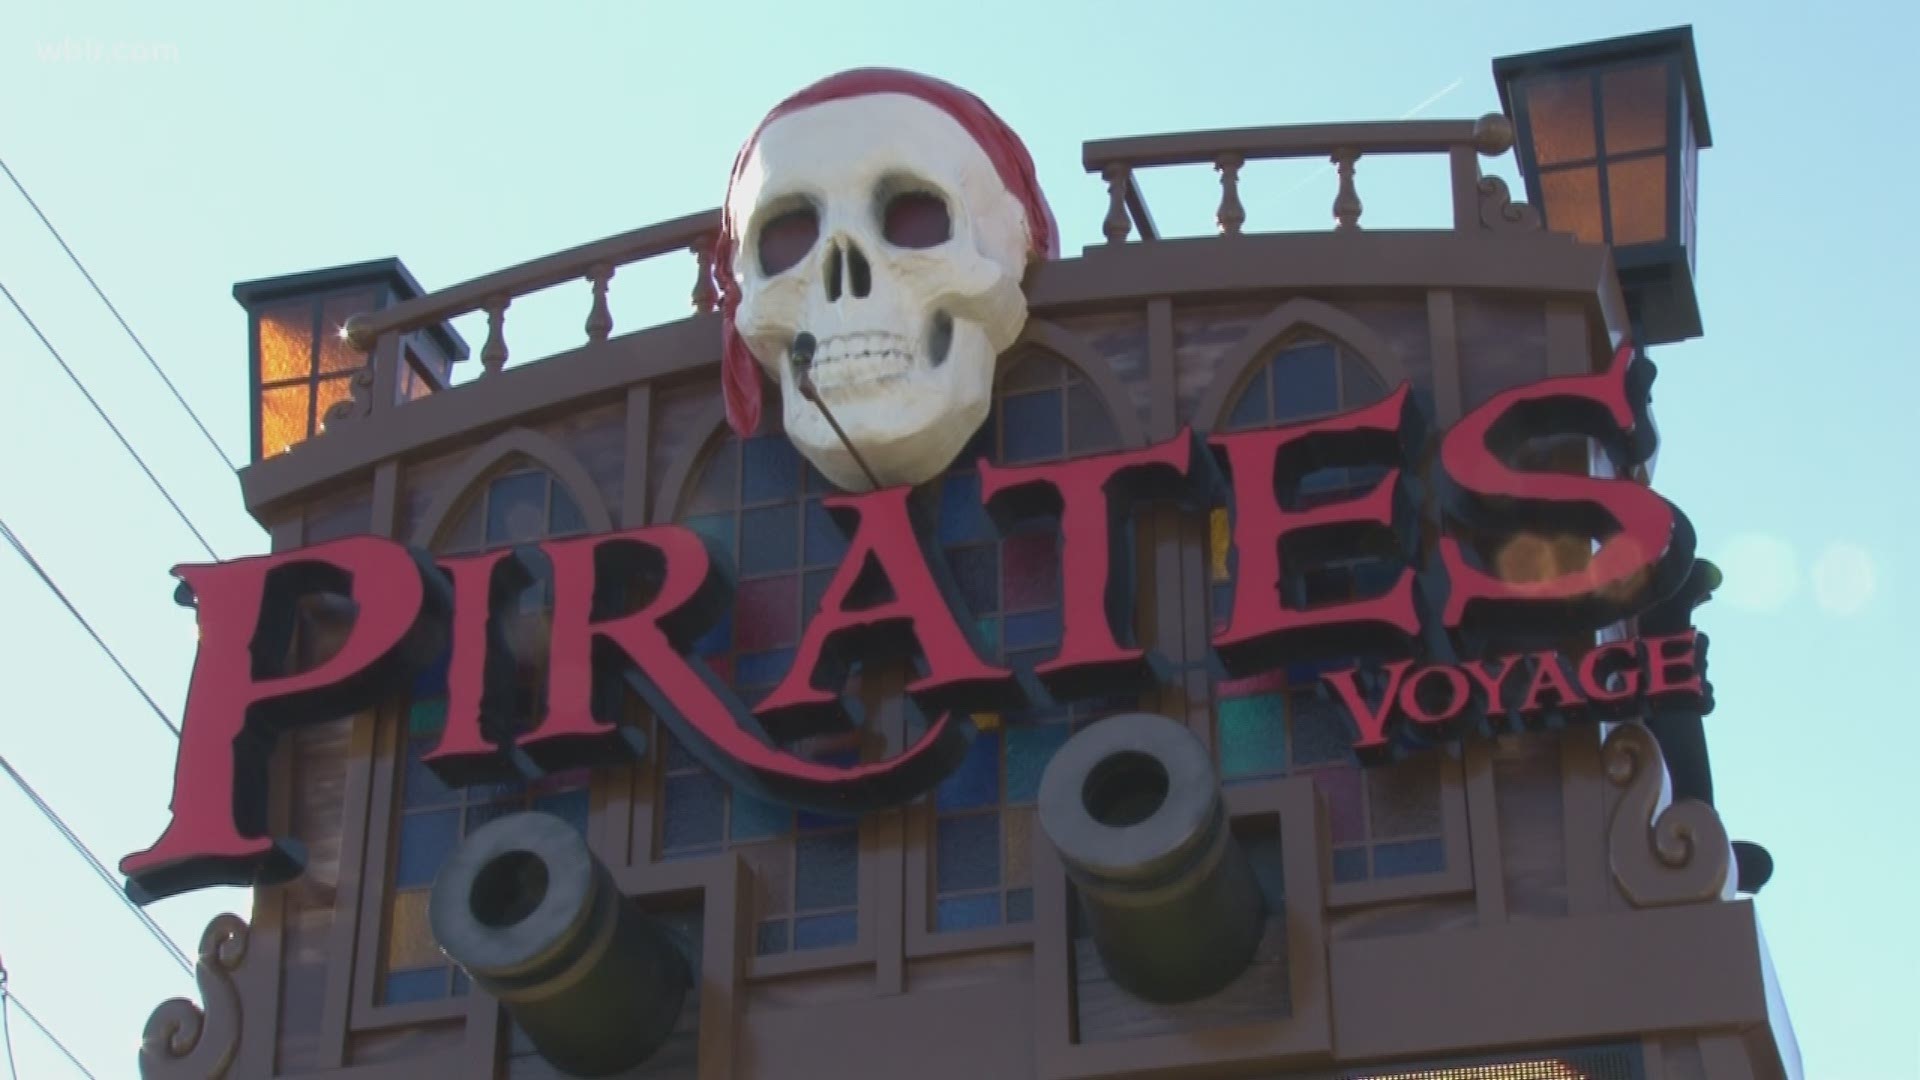 "Pirates Voyage" will be the fifth Sevier County dinner theatre owned by Dolly Parton.